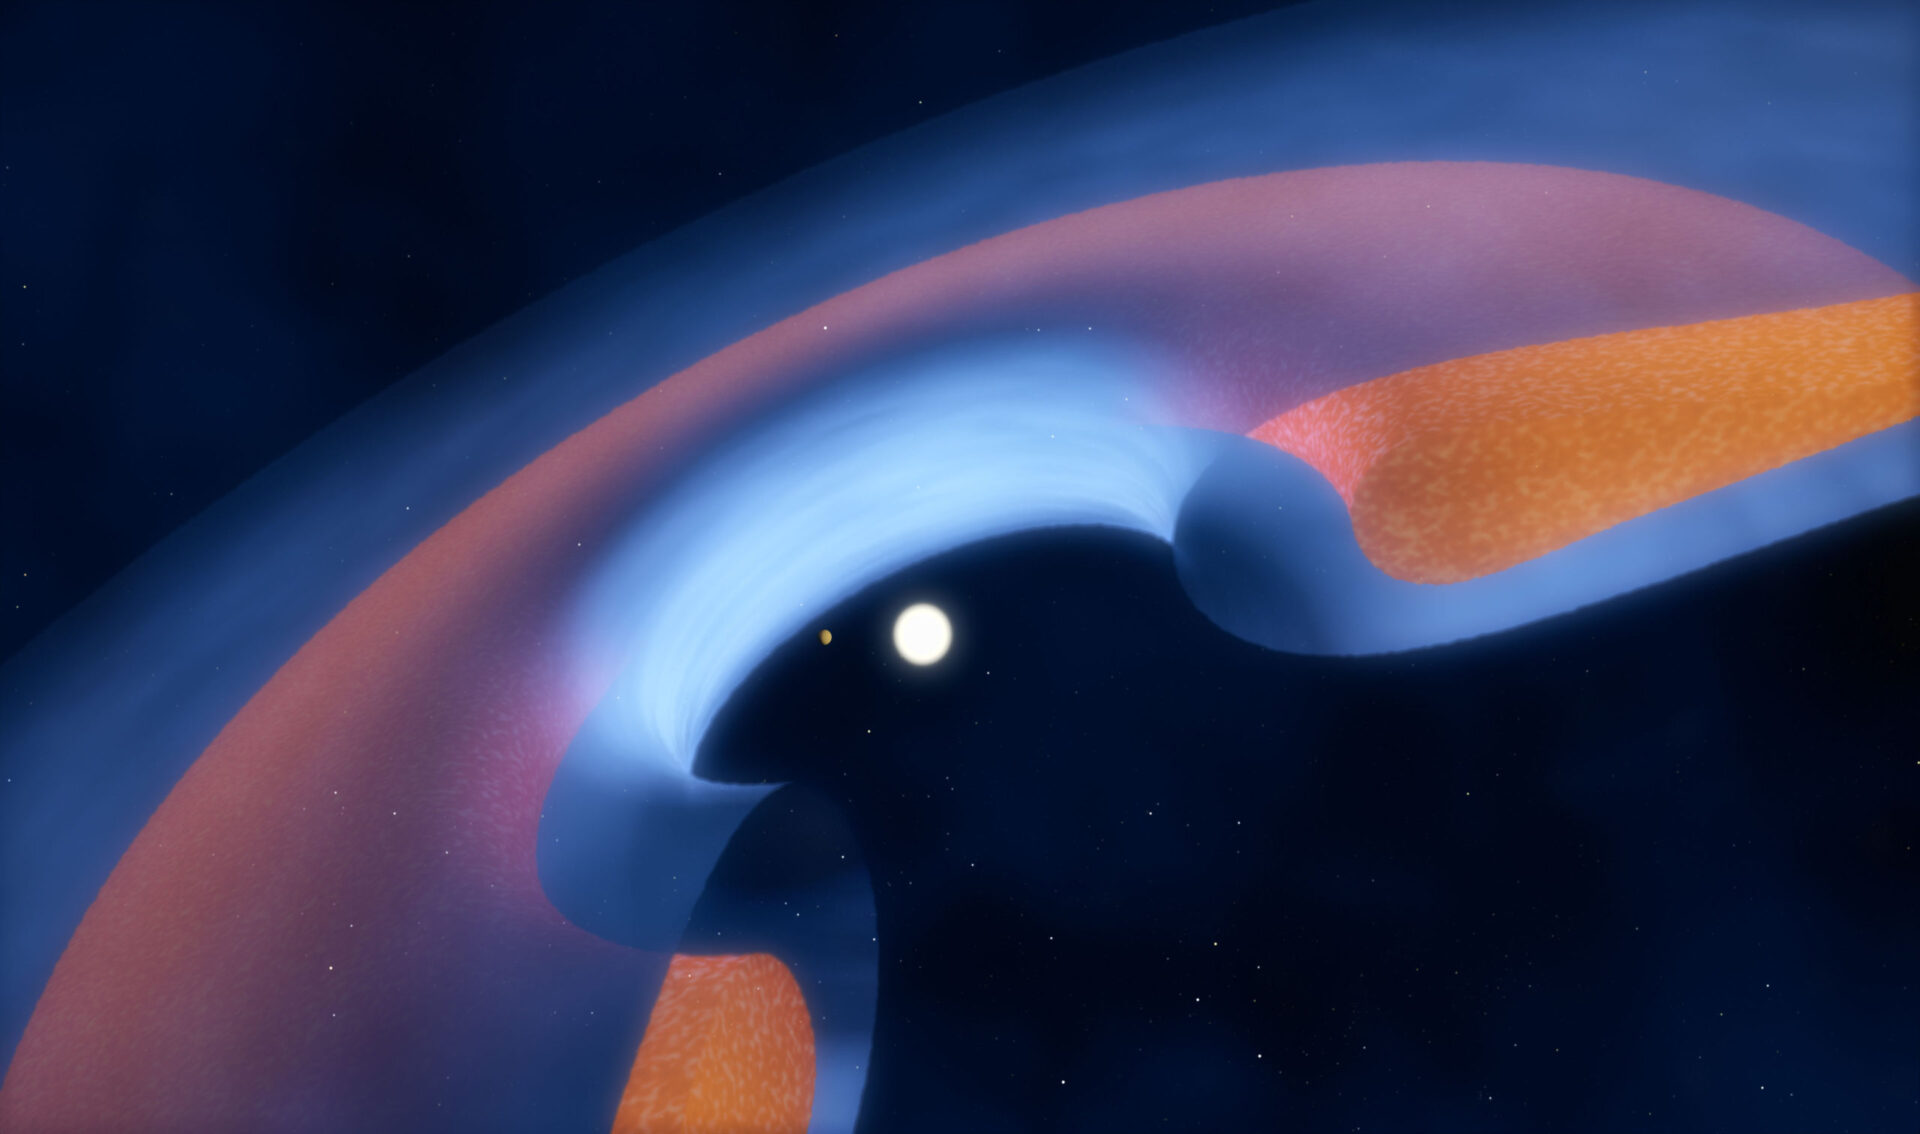 <p>Schematic view of a transitional disc around a young star<br />
This schematic diagram shows how the dust (brown) and gas (blue) is distributed around the star, and how a young planet is clearing the central gap. Credit: ALMA (ESO/NAOJ/NRAO)/M. Kornmess</p>
